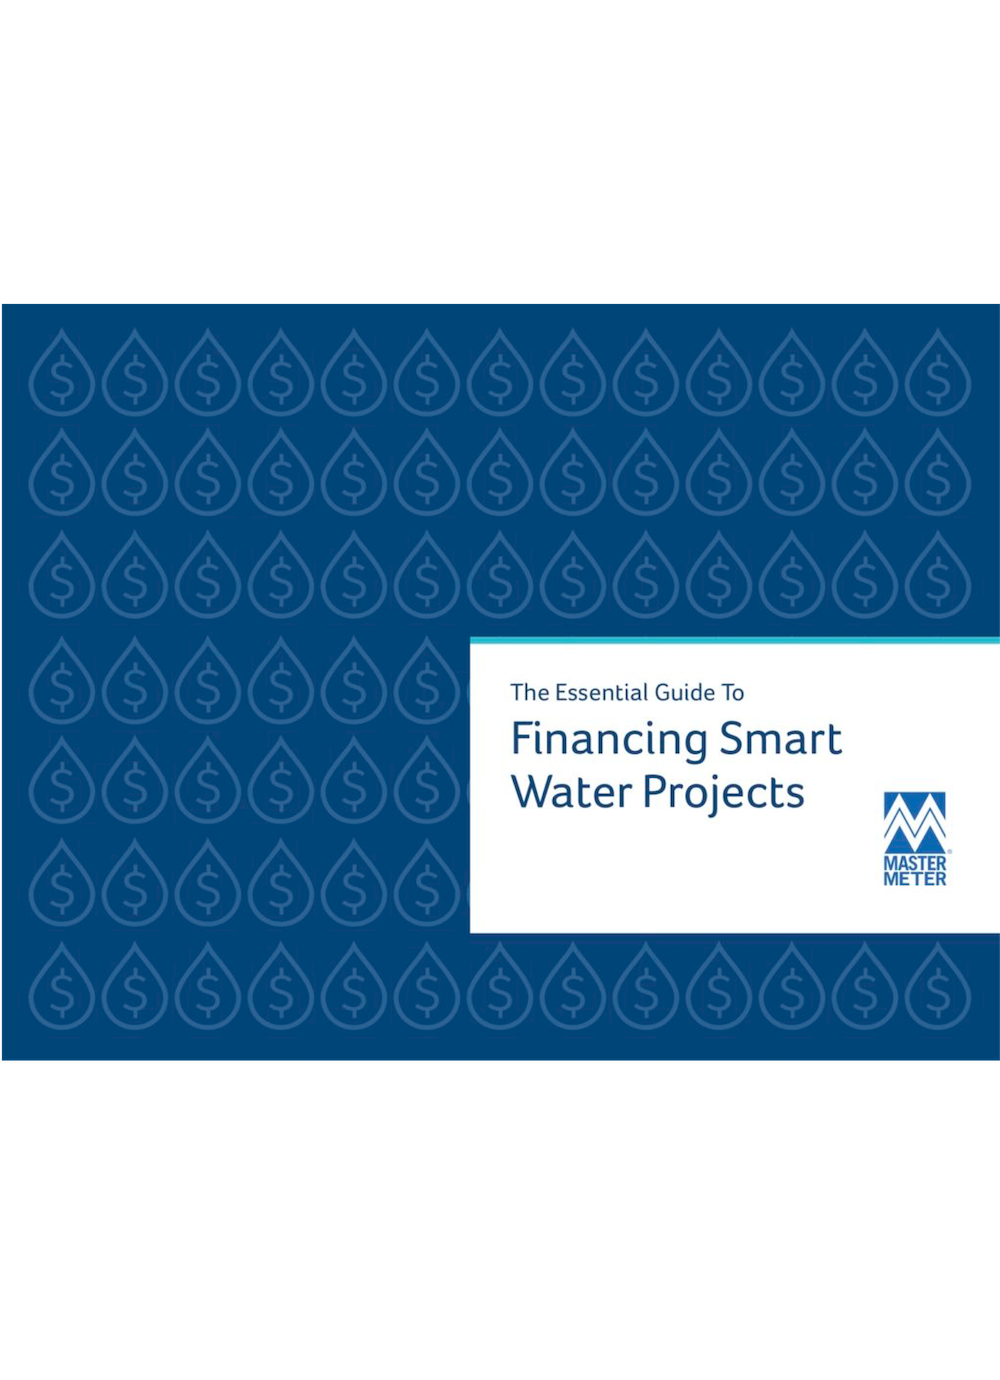 The Essential Guide to Financing Smart Water Projects